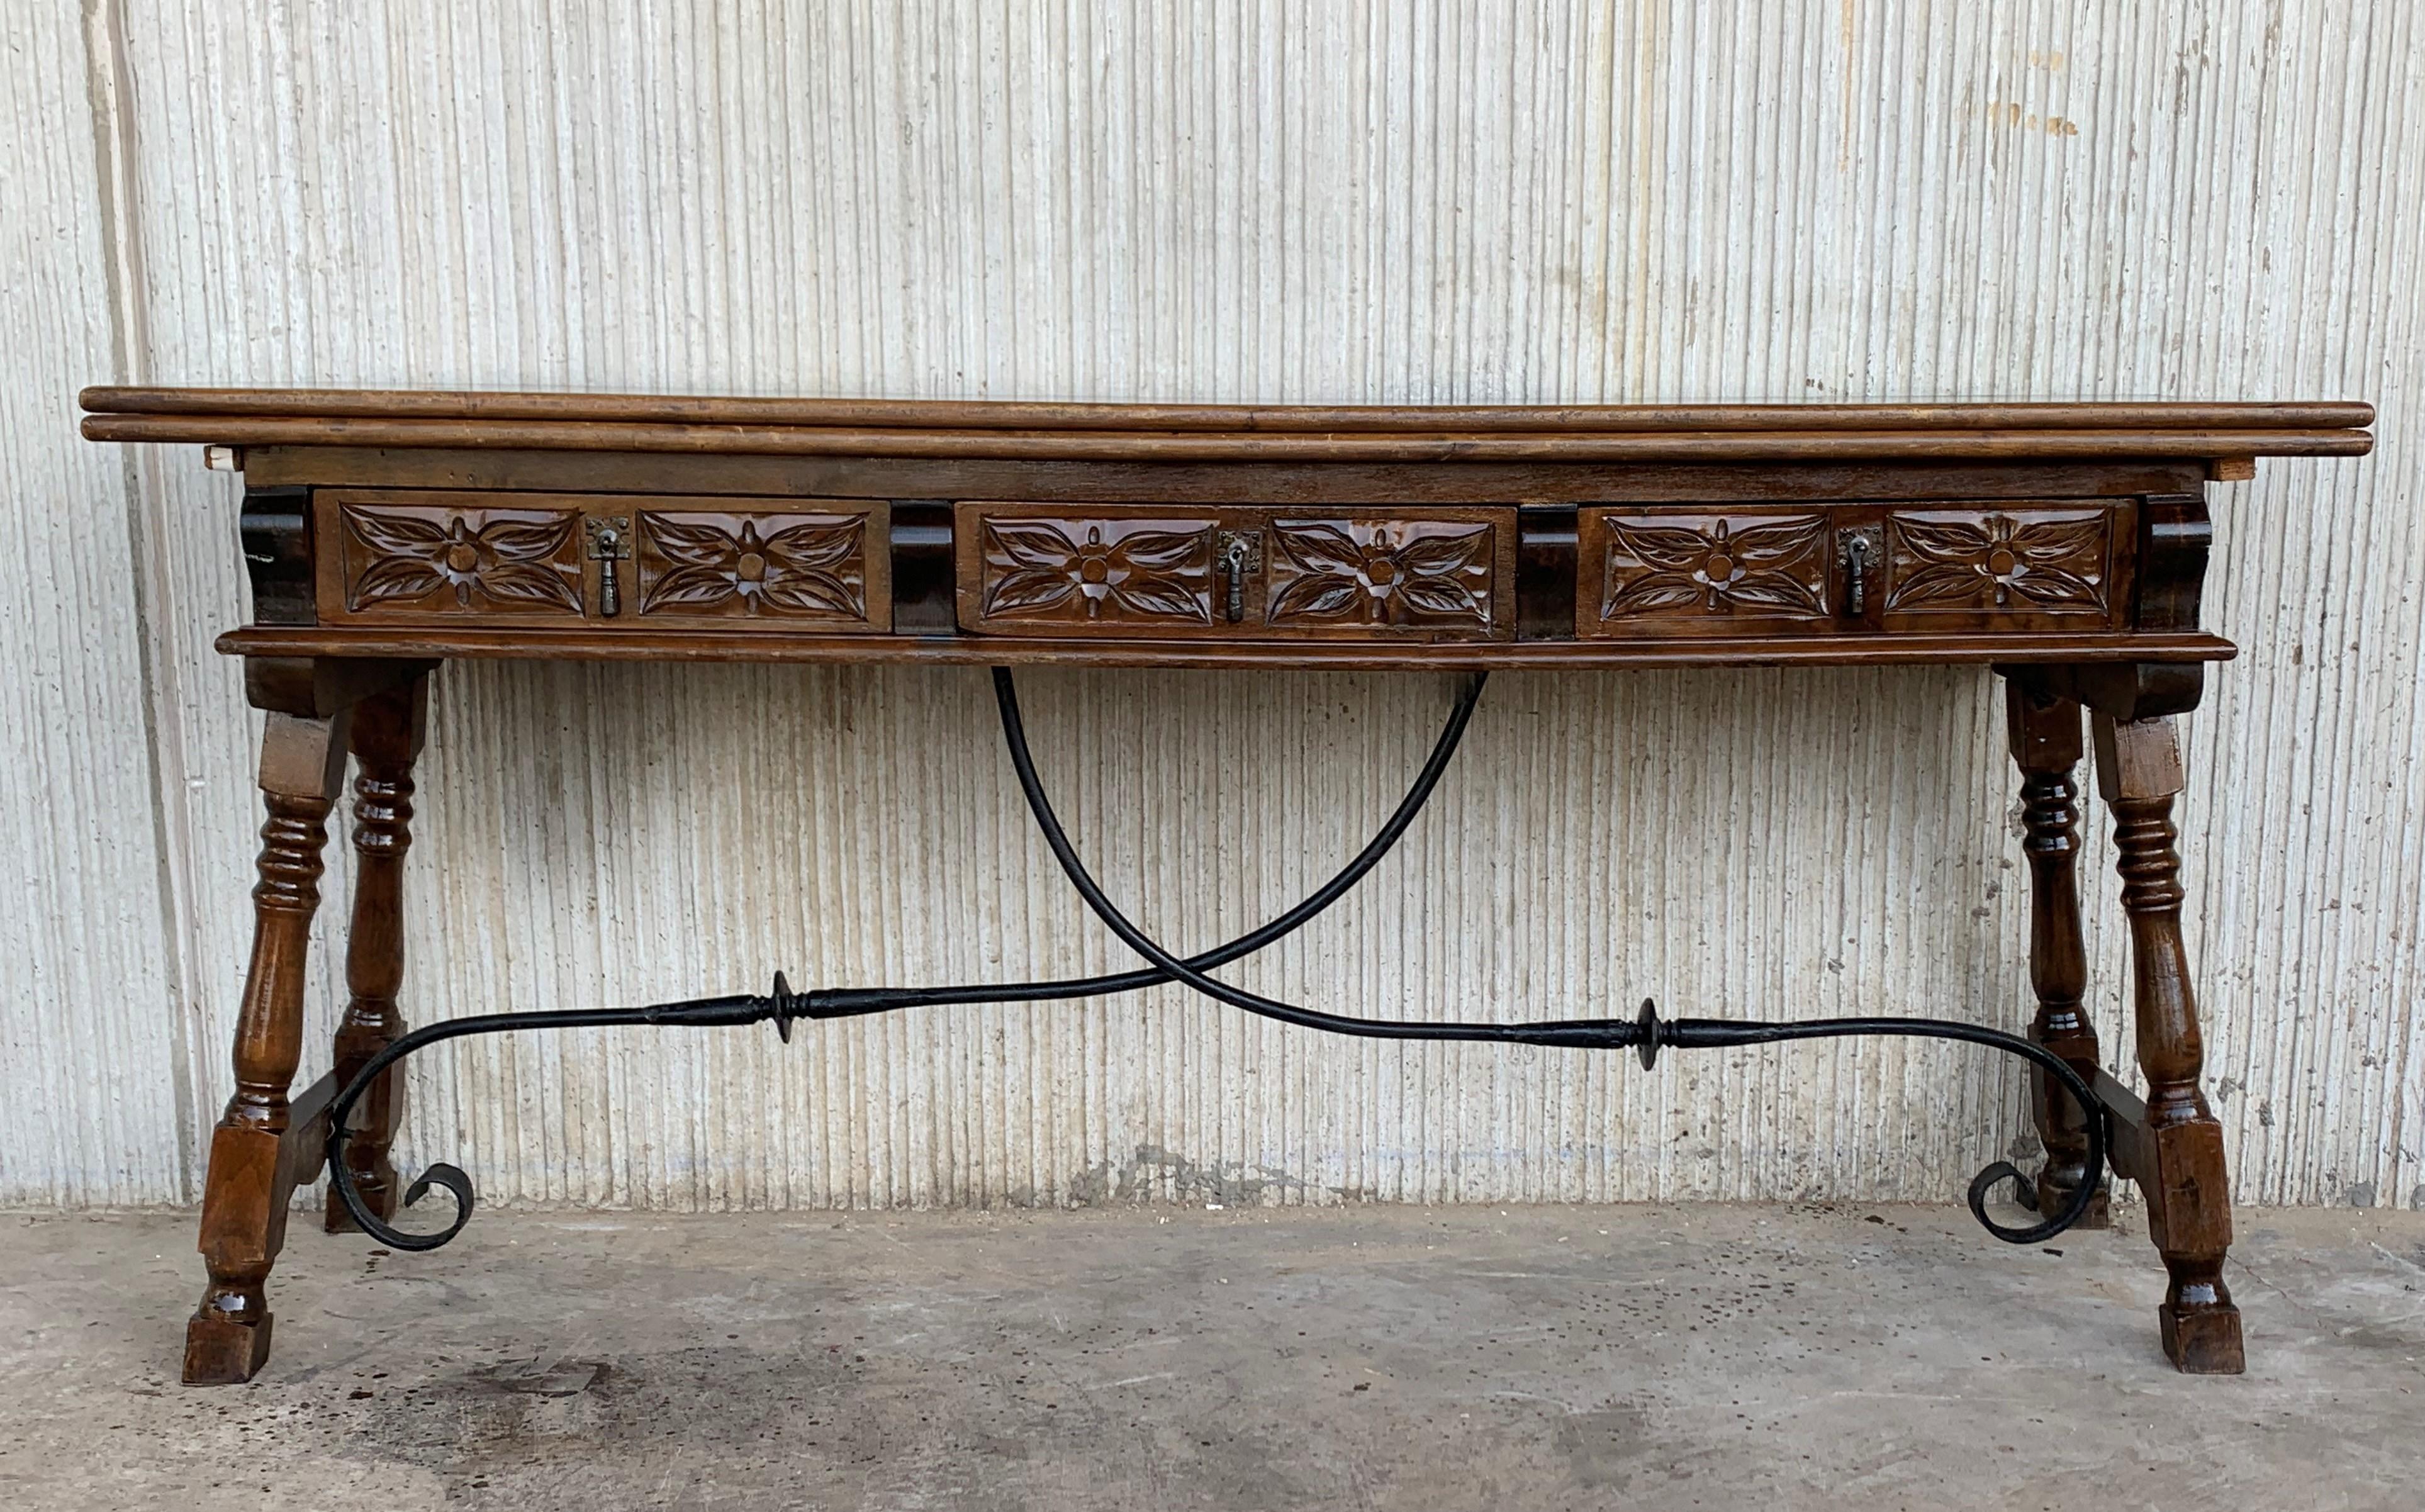 20th century Spanish console fold out farm table
Works as both a dining table and console.
Extra measures:
16.53